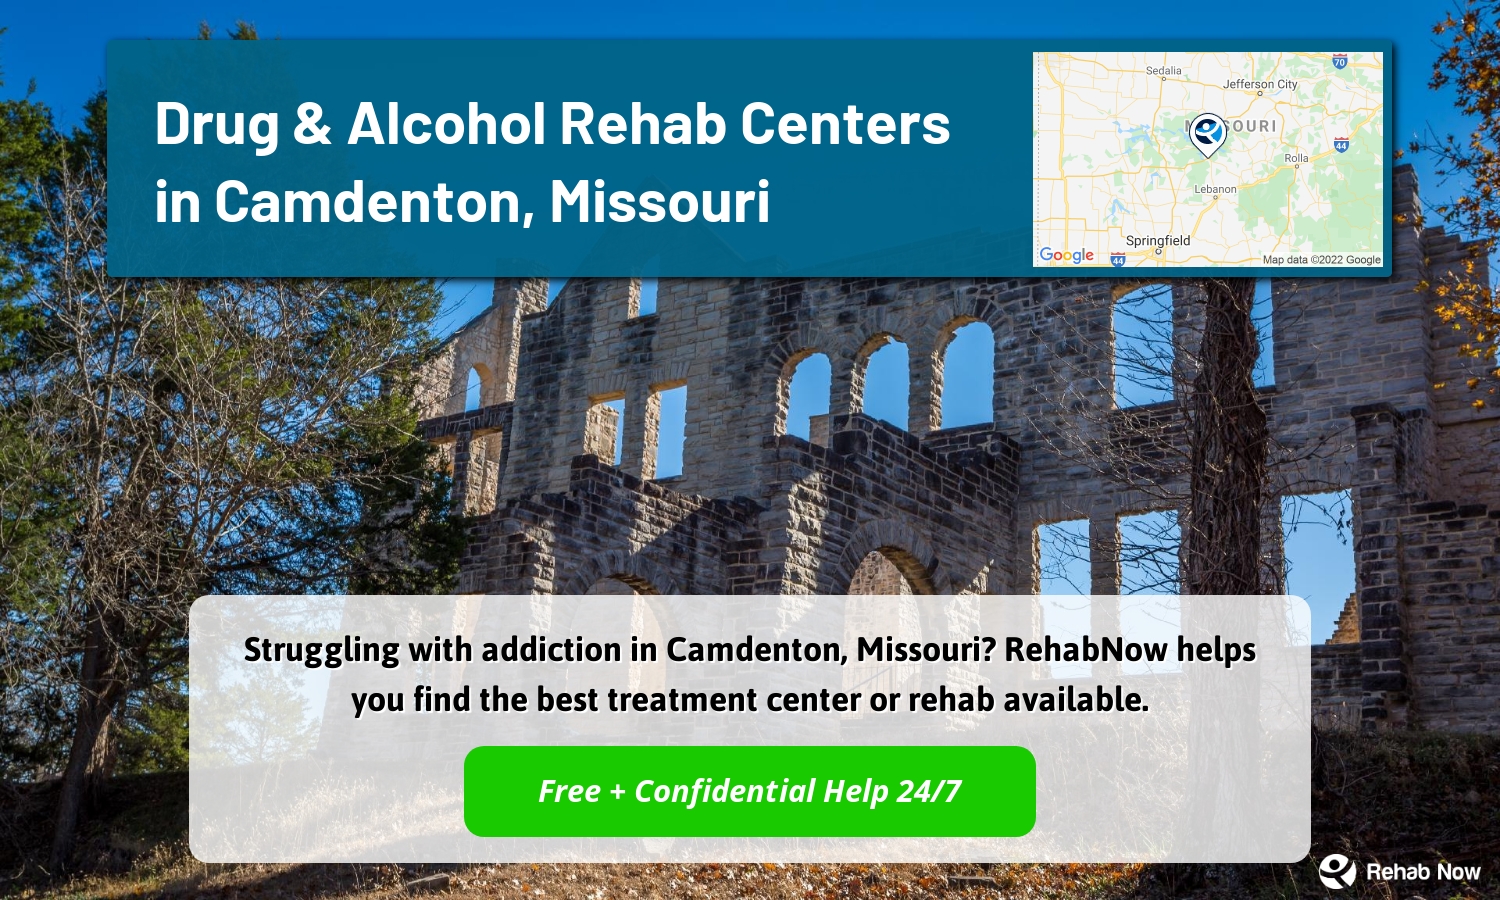 Struggling with addiction in Camdenton, Missouri? RehabNow helps you find the best treatment center or rehab available.